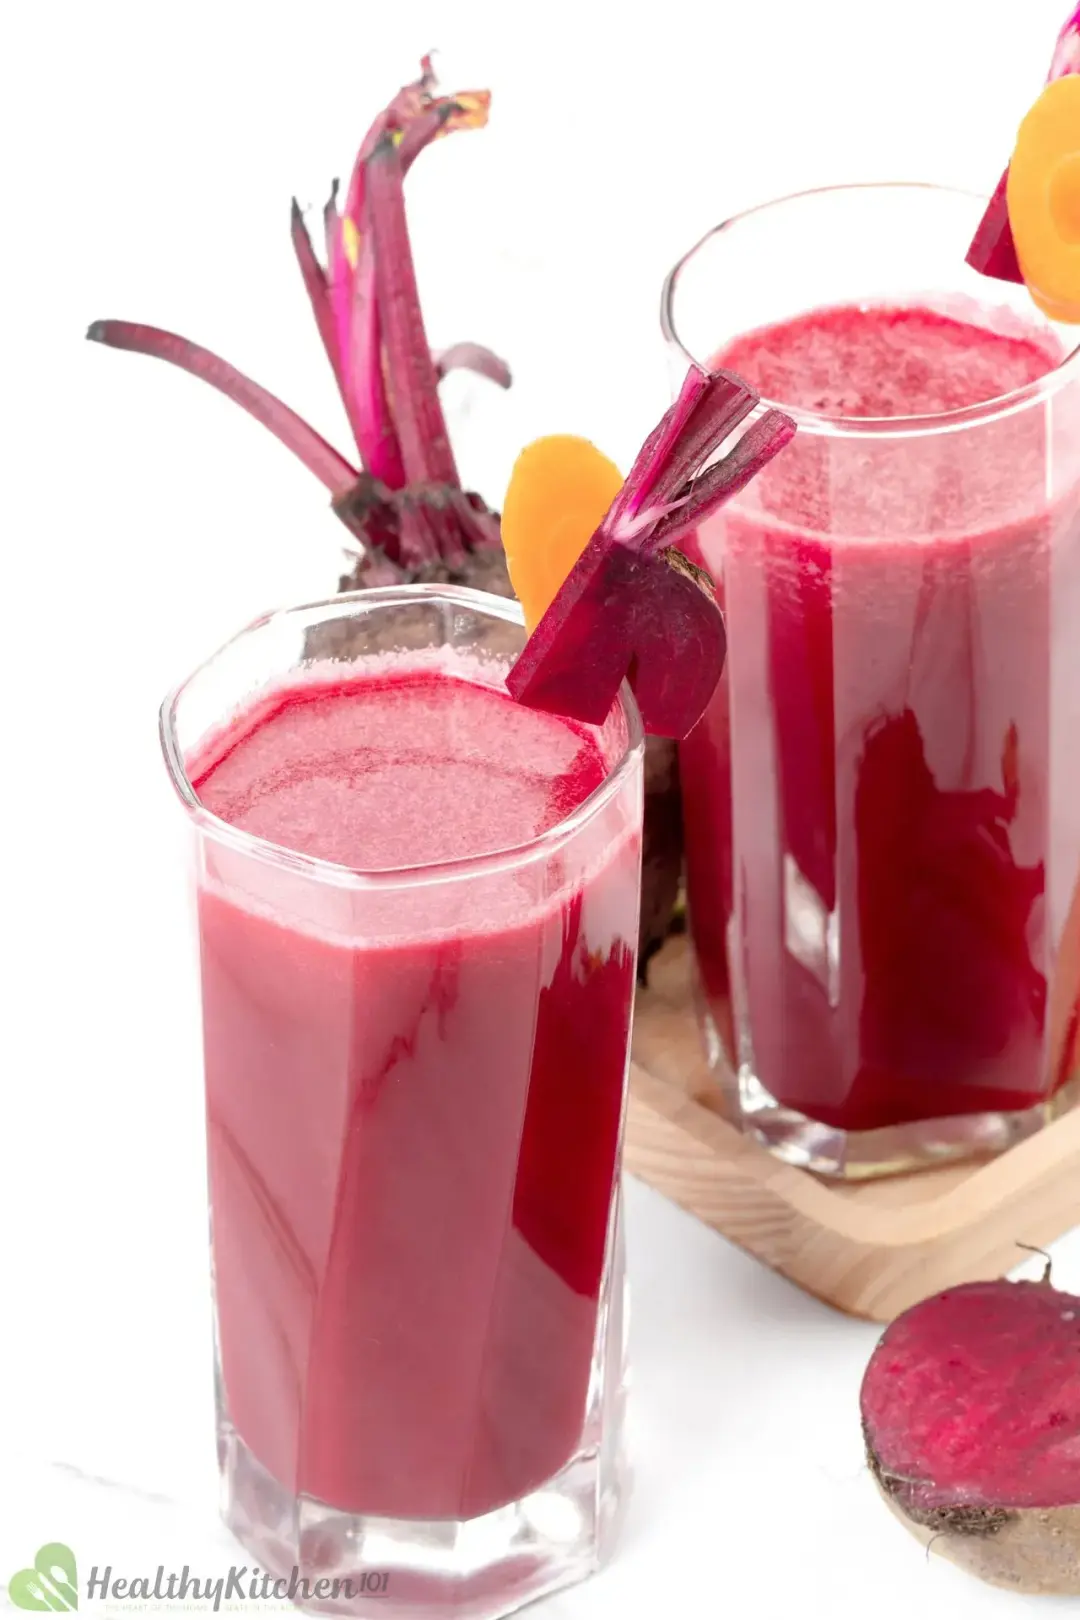 Two tall glasses of beetroot drink garnished with beetroot pieces on the rim